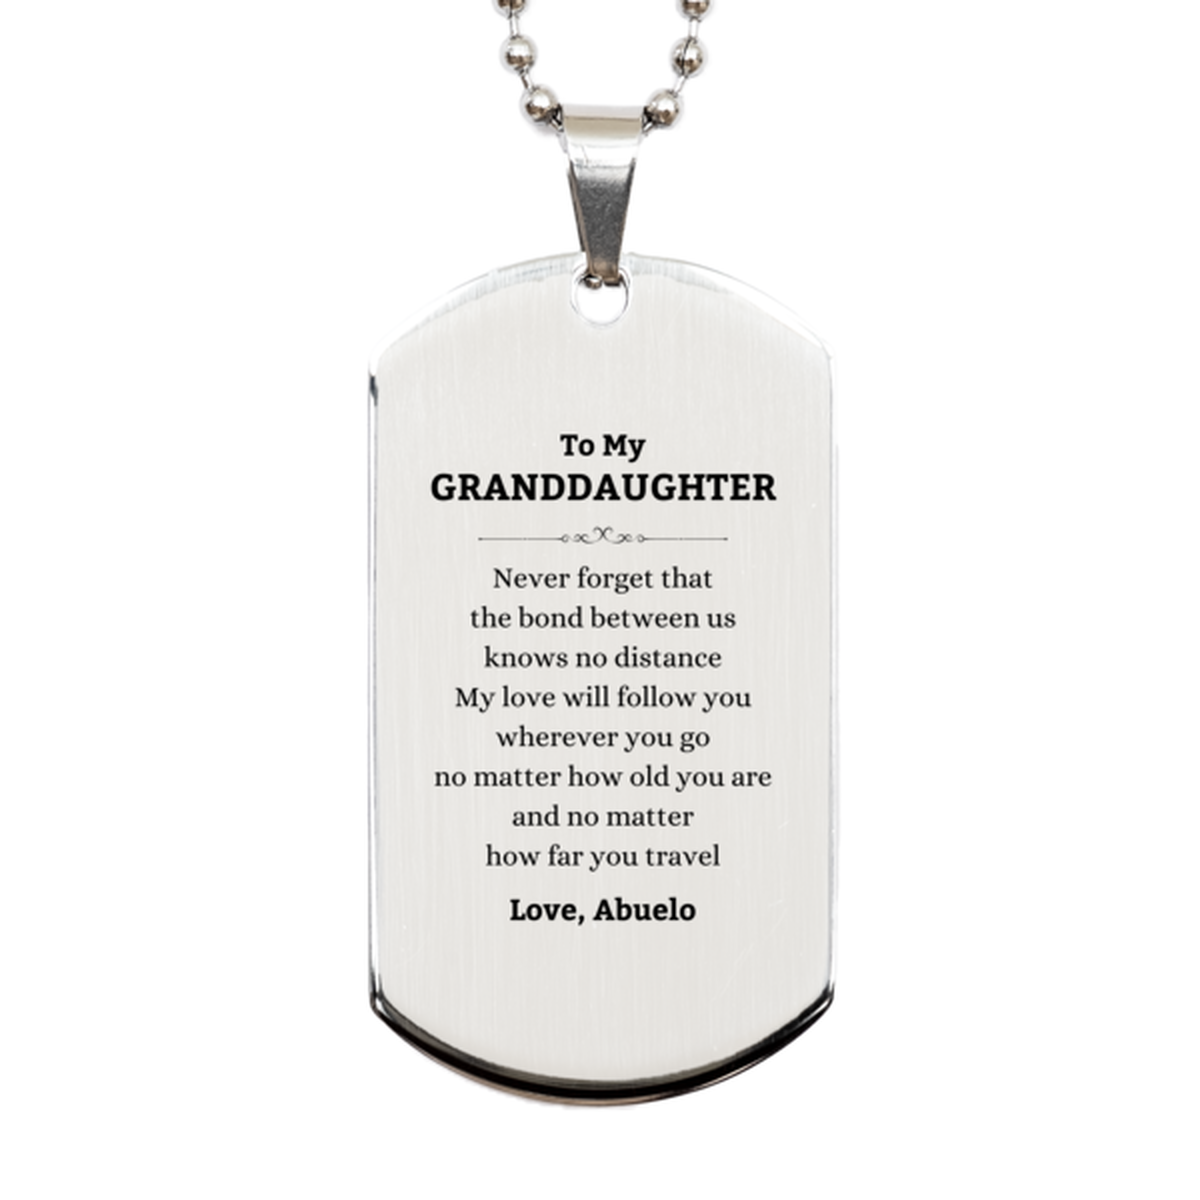 Granddaughter Birthday Gifts from Abuelo, Adjustable Silver Dog Tag for Granddaughter Christmas Graduation Unique Gifts Granddaughter Never forget that the bond between us knows no distance. Love, Abuelo